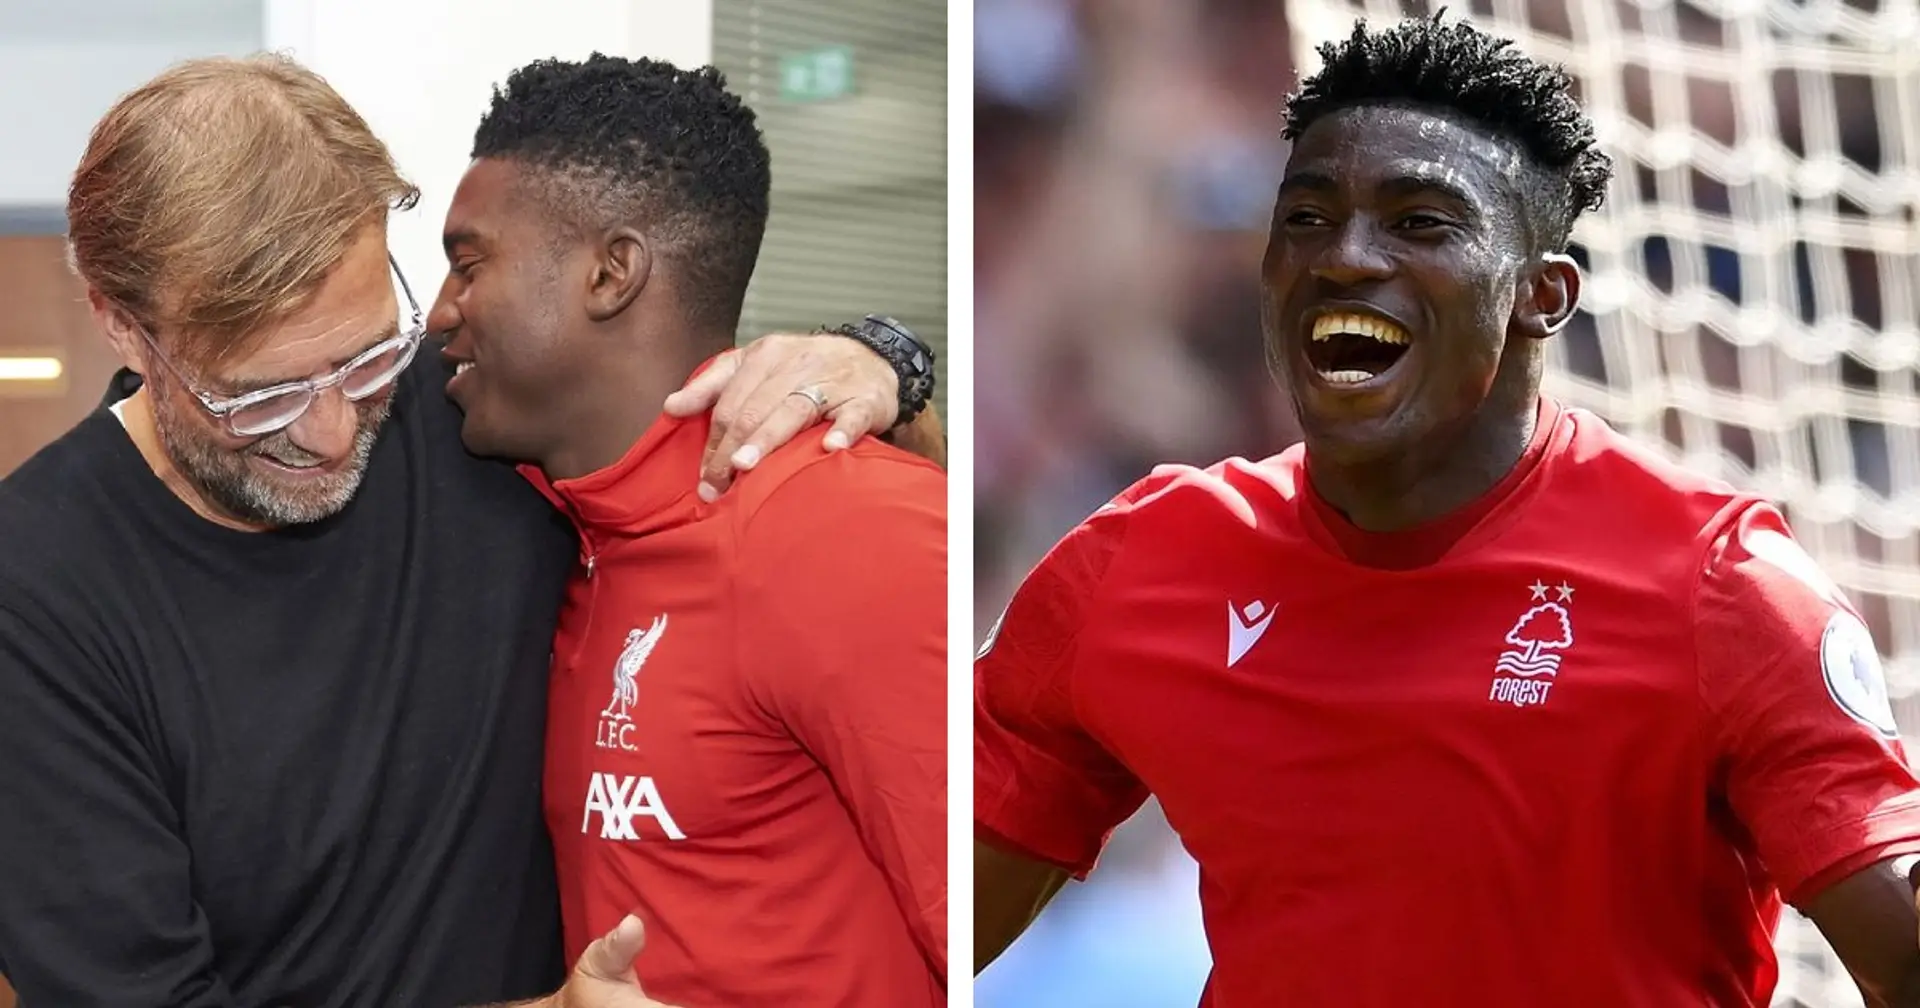 'Never give up': Taiwo Awoniyi's path from struggling at Liverpool to scoring winning goal against Reds